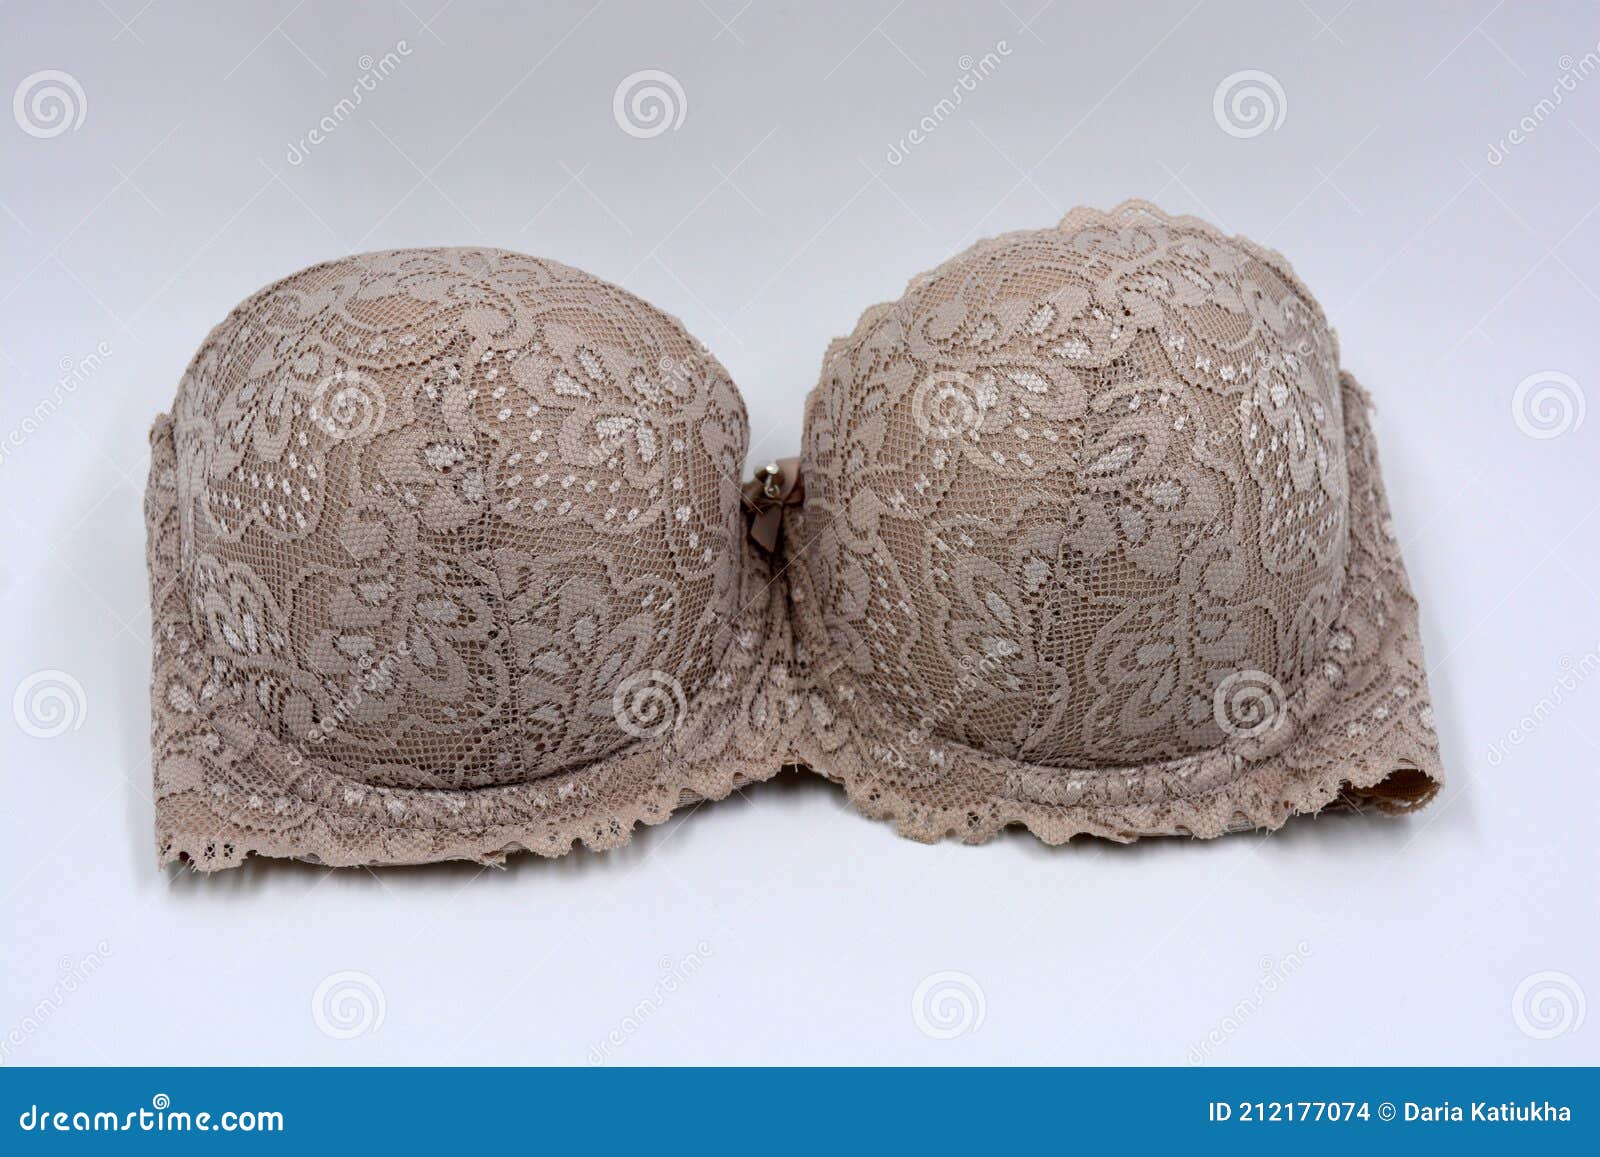 Handsome Brown, Bodily Female Bra with Pitpus, Lingerie Located on